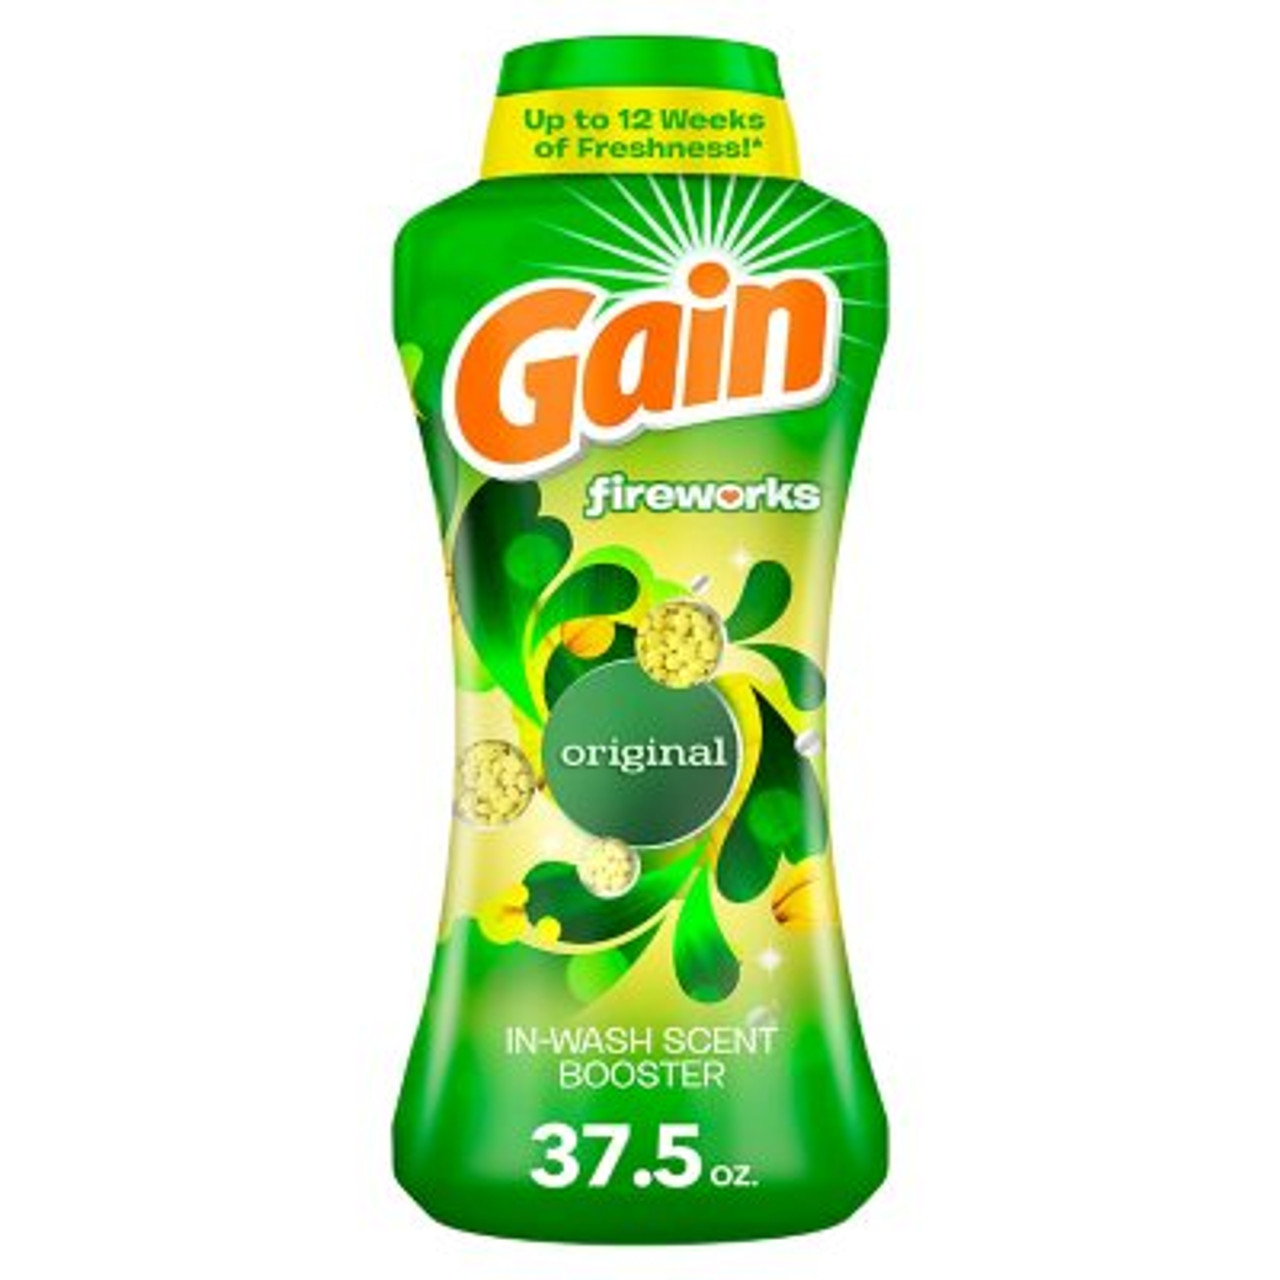 Gain Fireworks In-Wash Scent Booster Beads, Original (37.5 oz.) - [From 70.00 - Choose pk Qty ] - *Ships from Miami